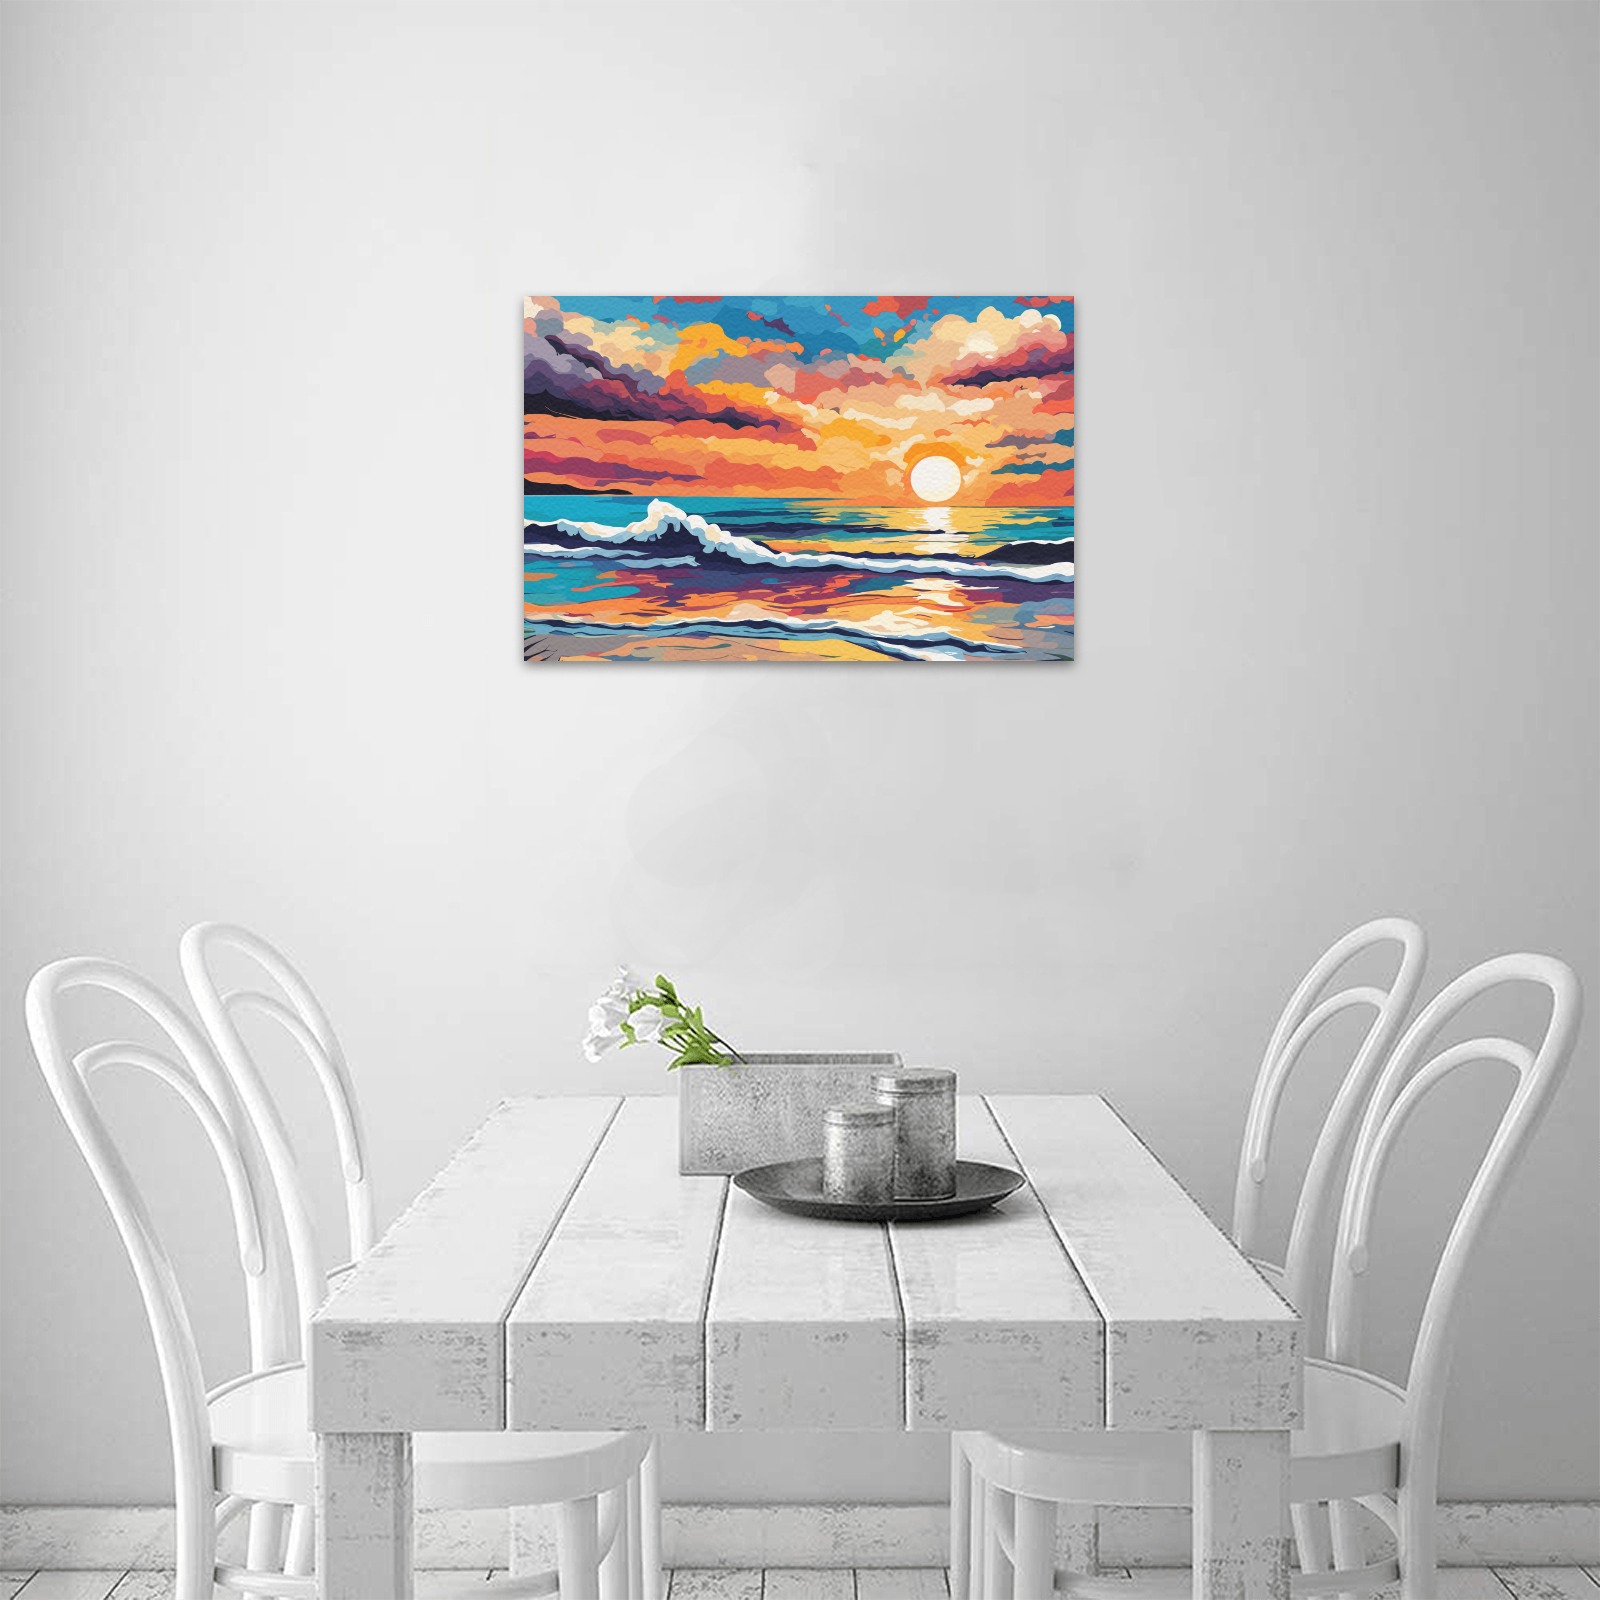 Deserted tropical beach at colorful sunset art. Upgraded Canvas Print 18"x12"